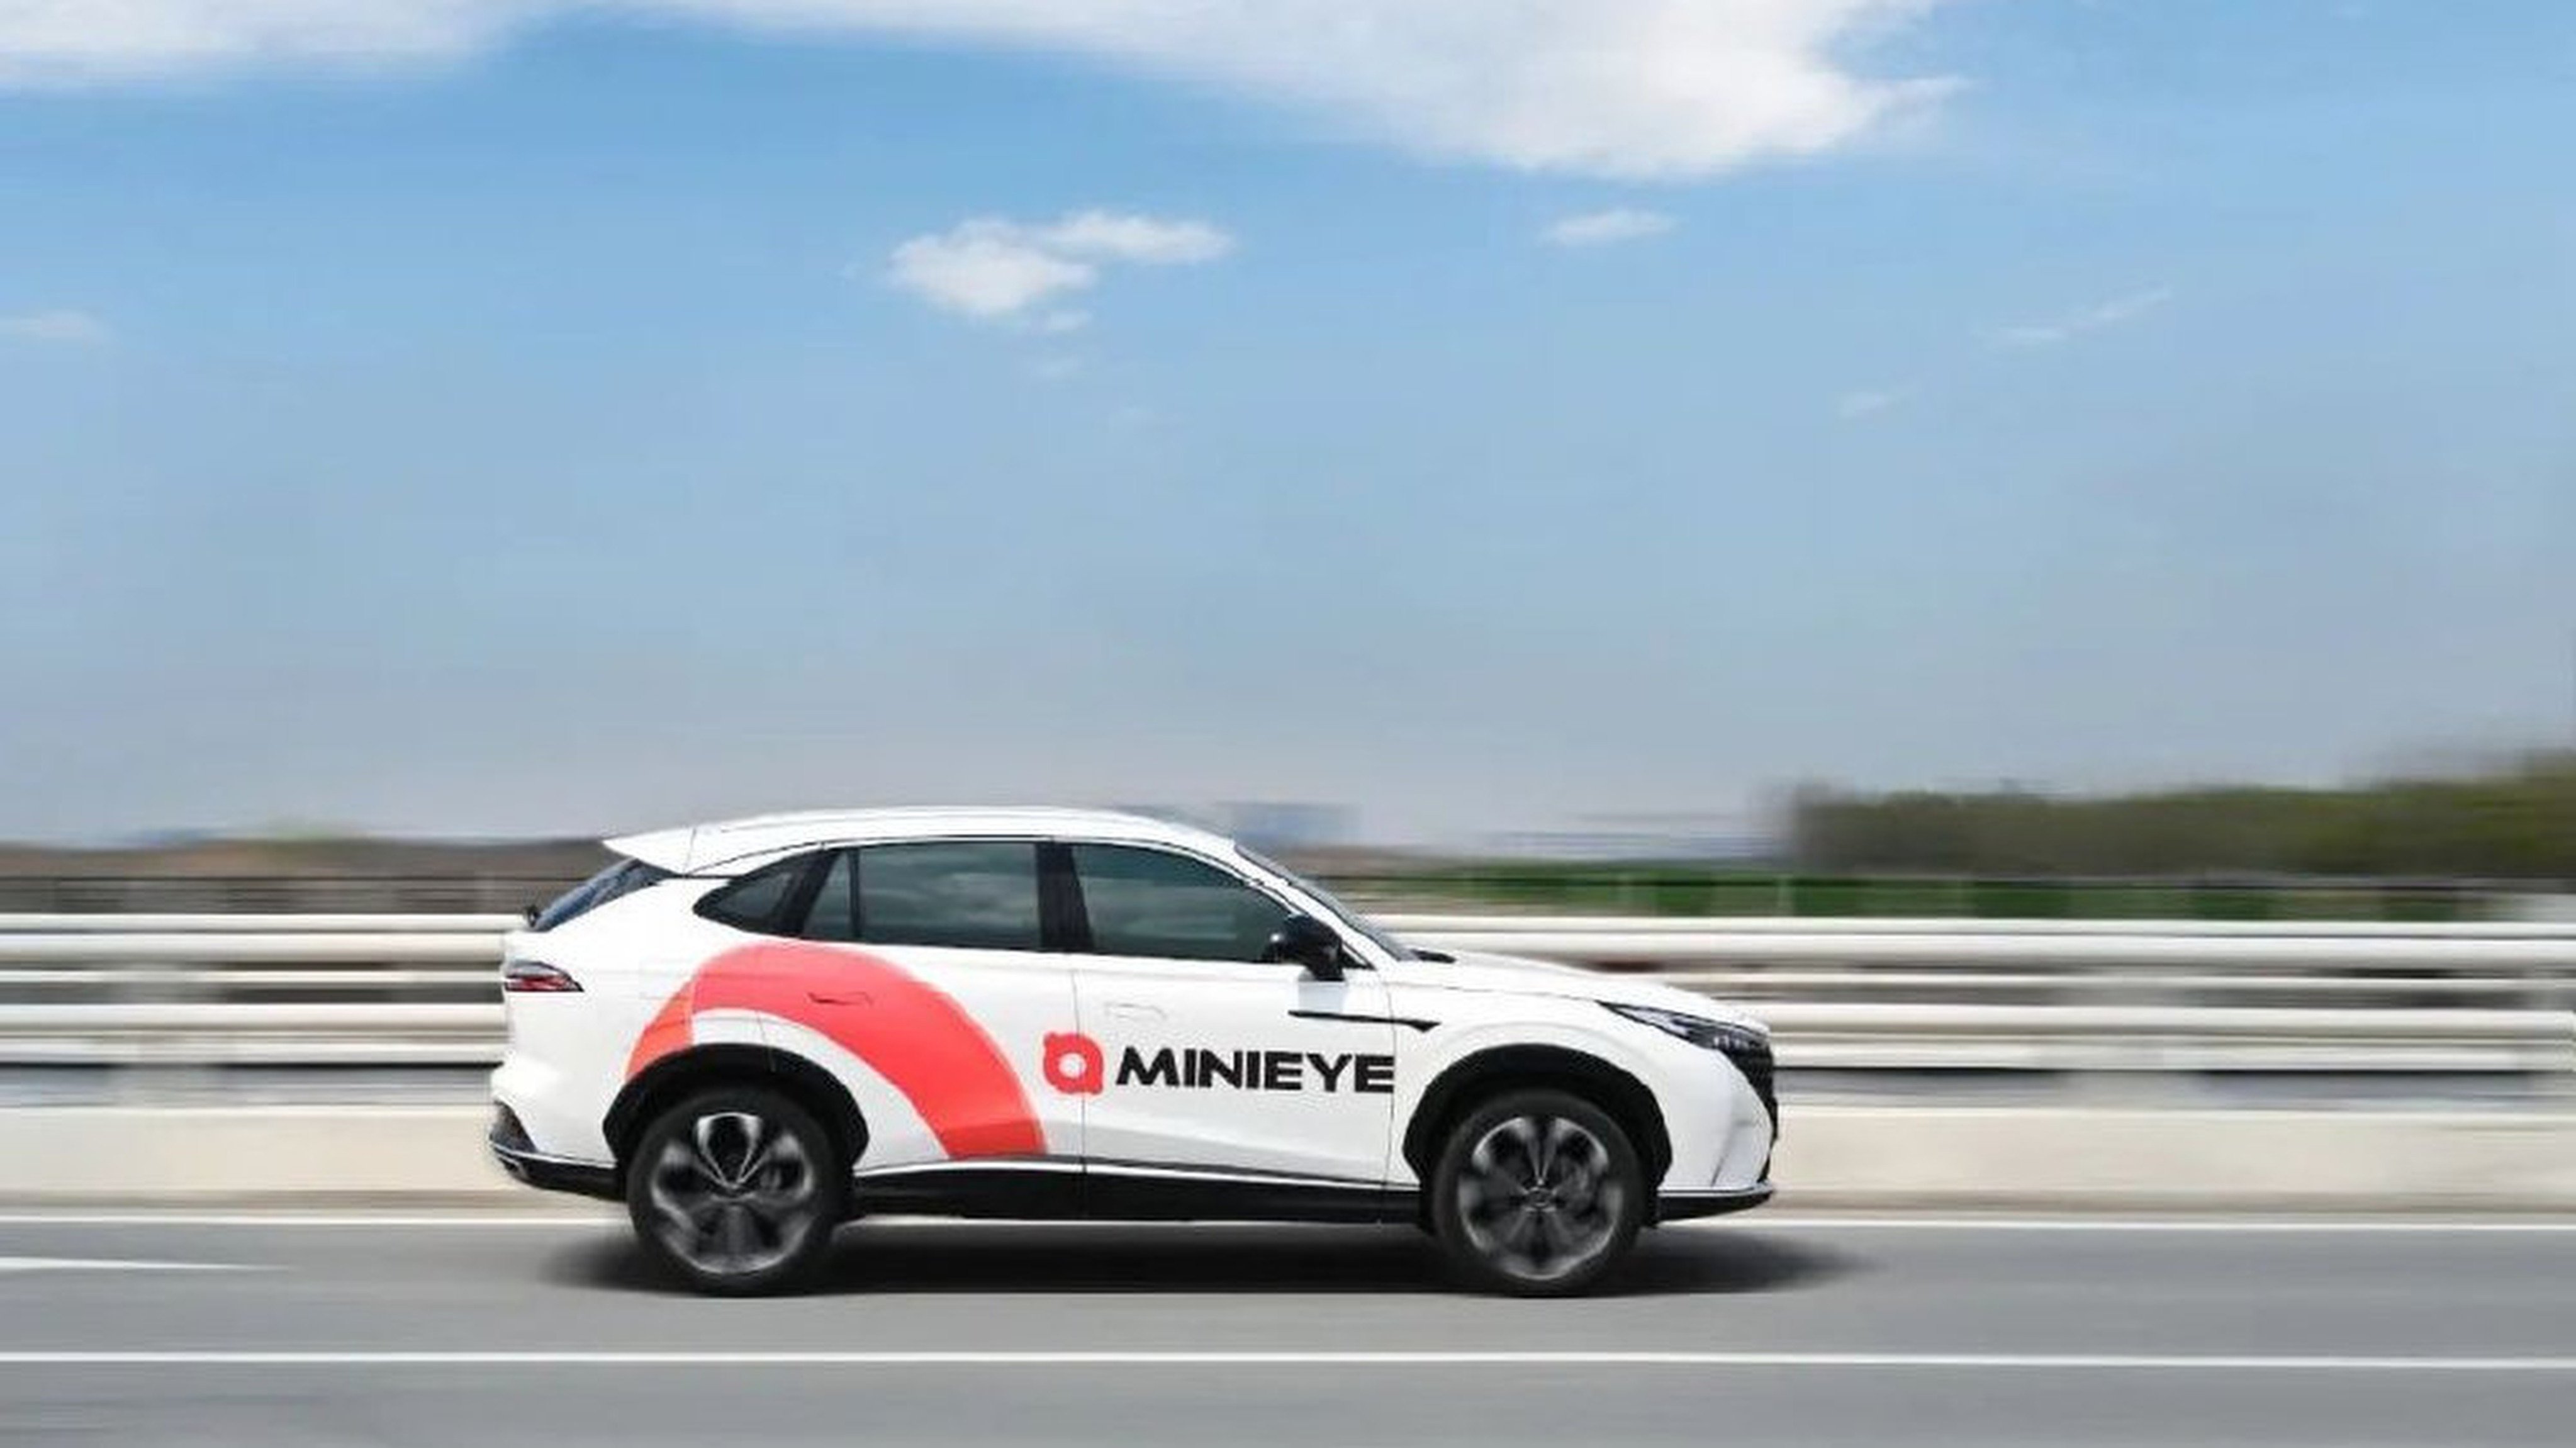 Minieye Technology, which provides autonomous driving solutions, has filed to go public in Hong Kong. Photo: Handout